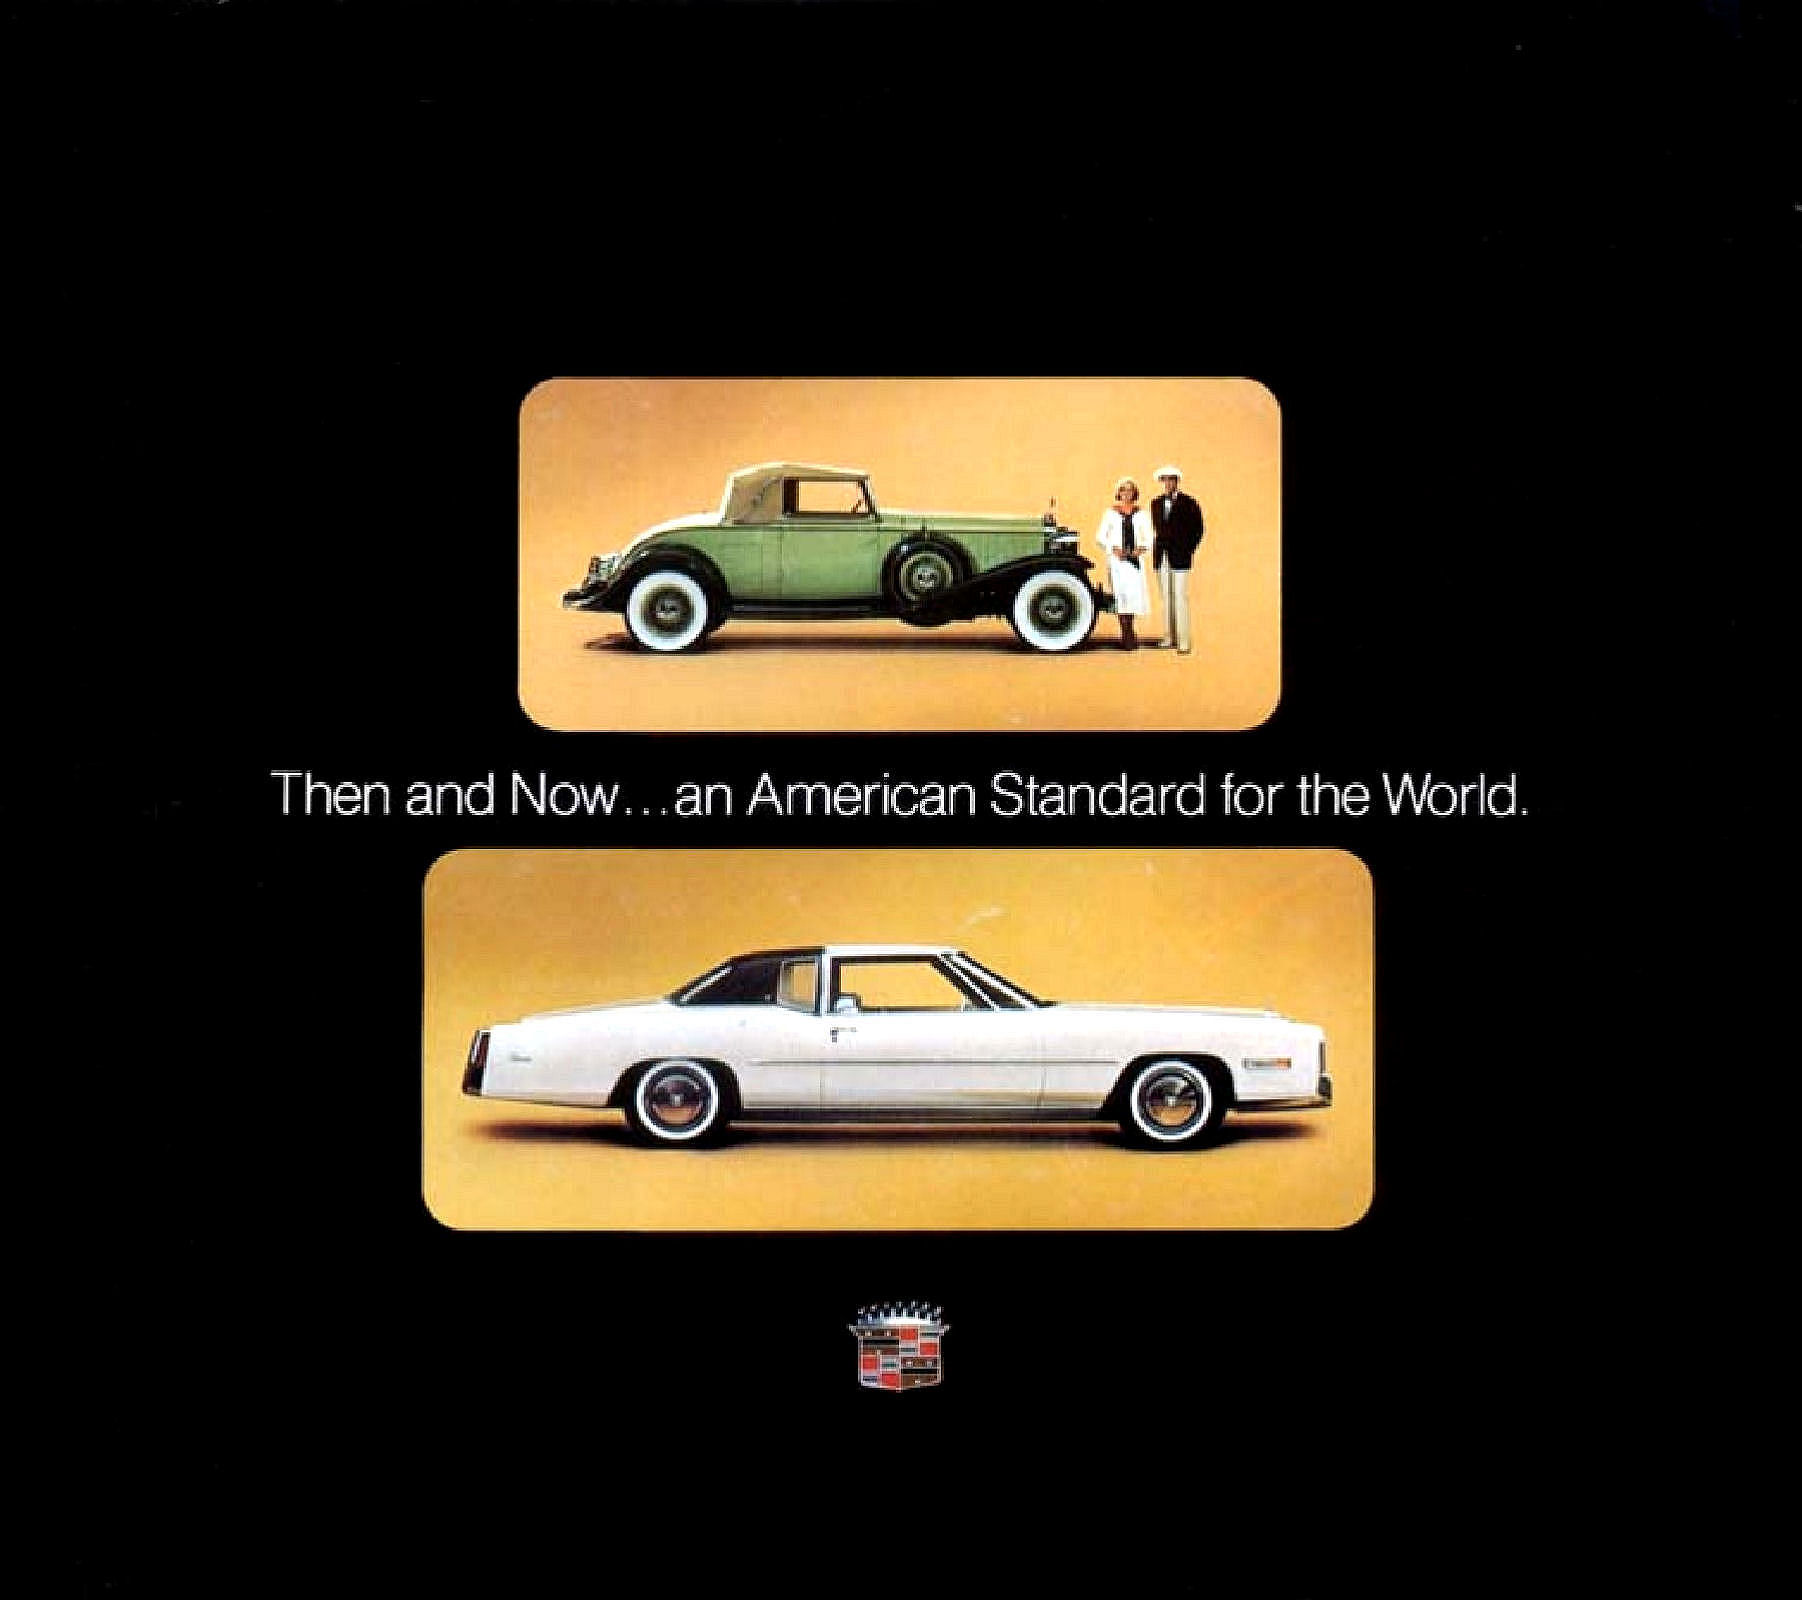 1975 Cadillac Then & Now Mailer-01